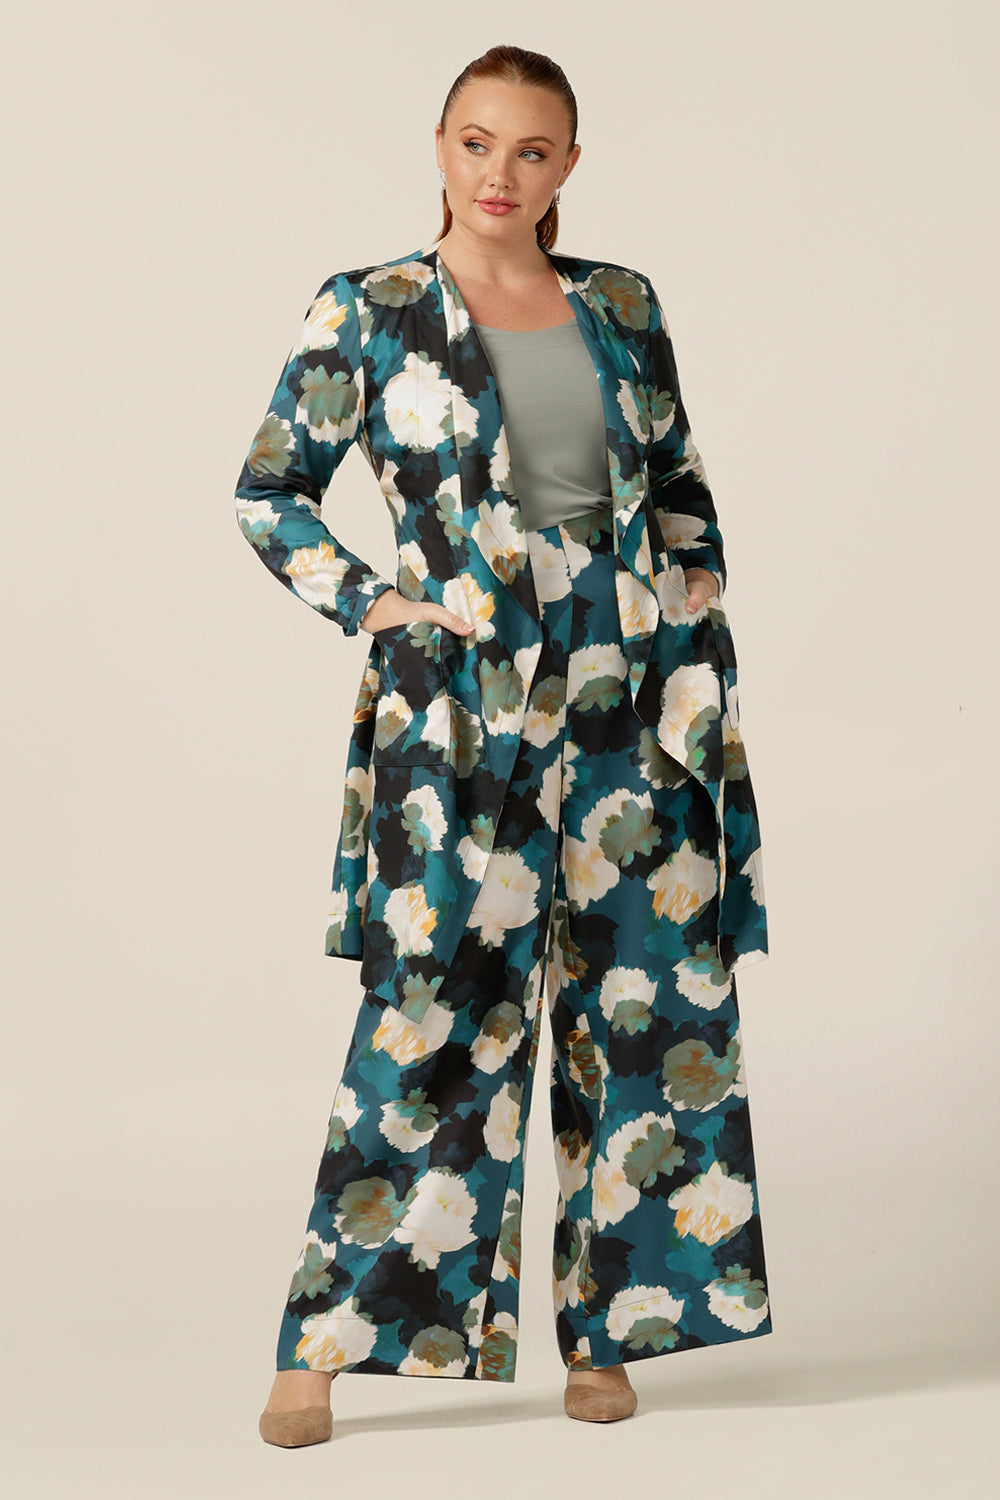 a size 12, plus size woman wears a soft trench coat-style jacket with waterfall front, patch pockets and belt tie. Sustainably-made in Australia, this luxury knee-length jacket is worn wide printed wide-leg pants and a bamboo jersey top.